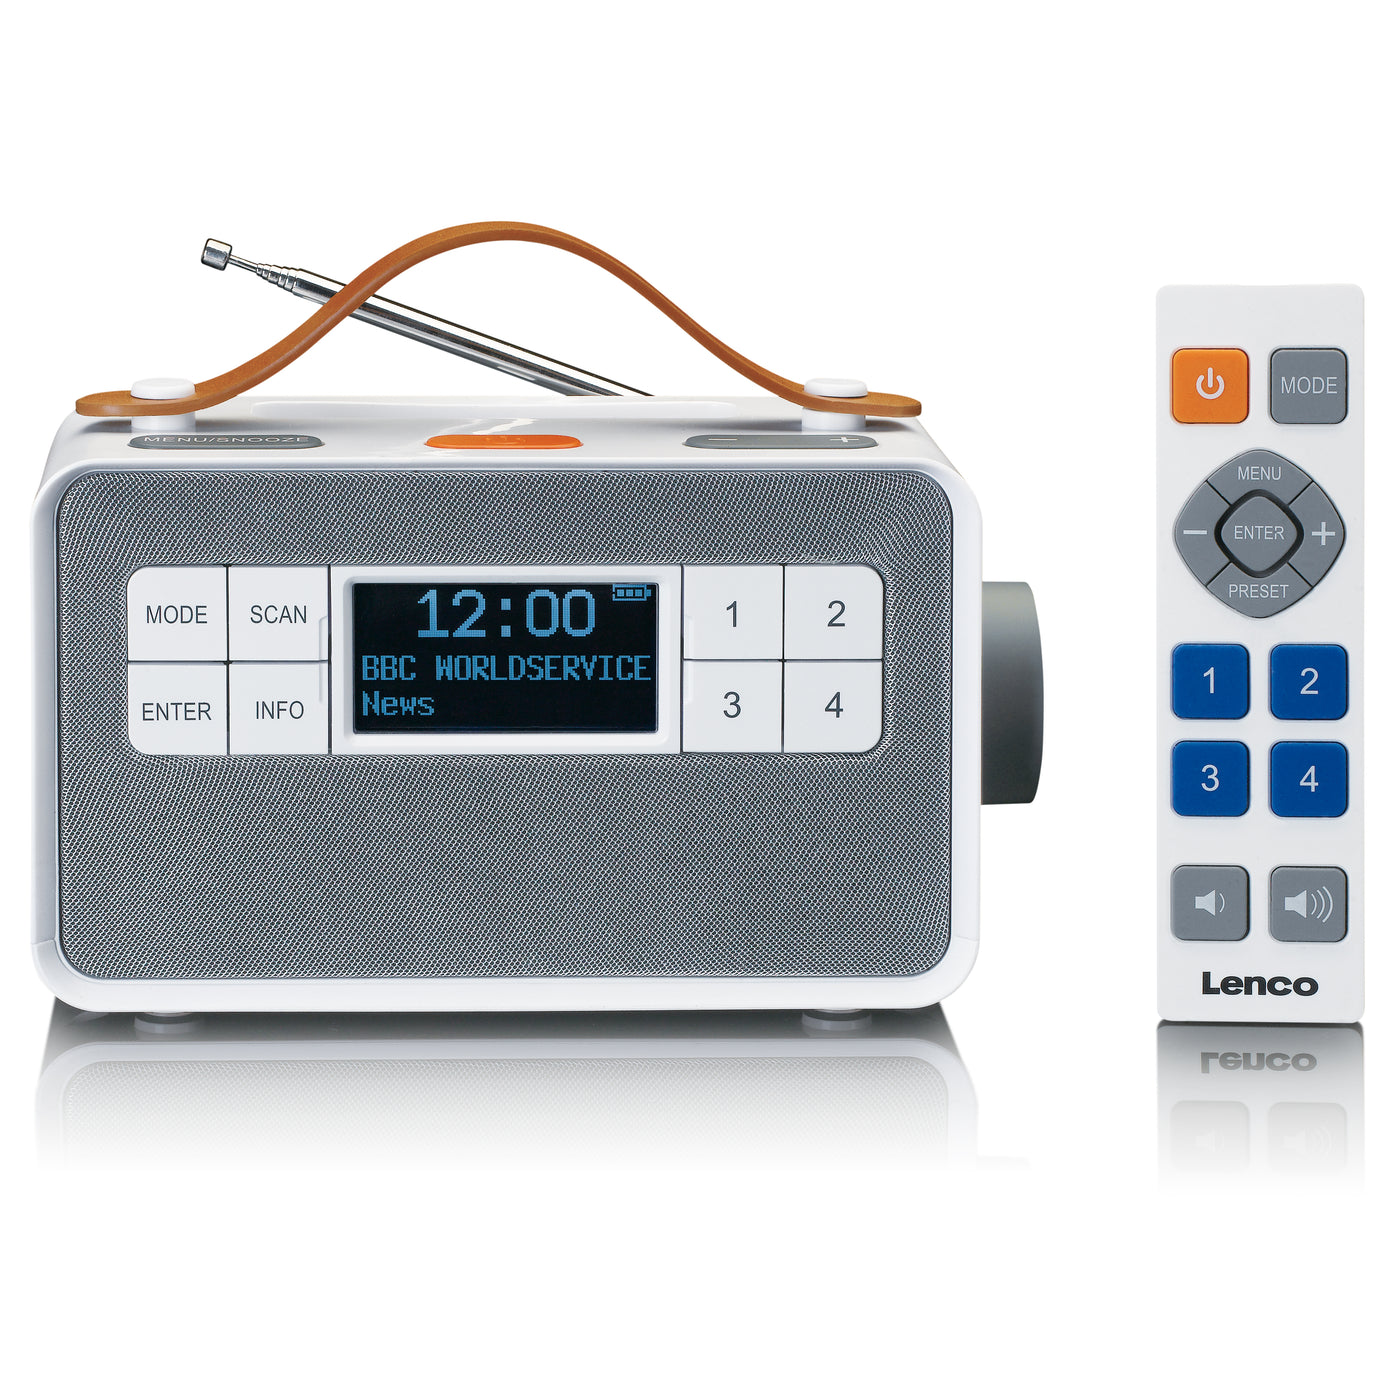 Buy Standard Quality China Wholesale Portable Color Screen Dab Radio Mt-dab-pc1  $16.8 Direct from Factory at Shenzhen Modeltime Electronics Co., Ltd